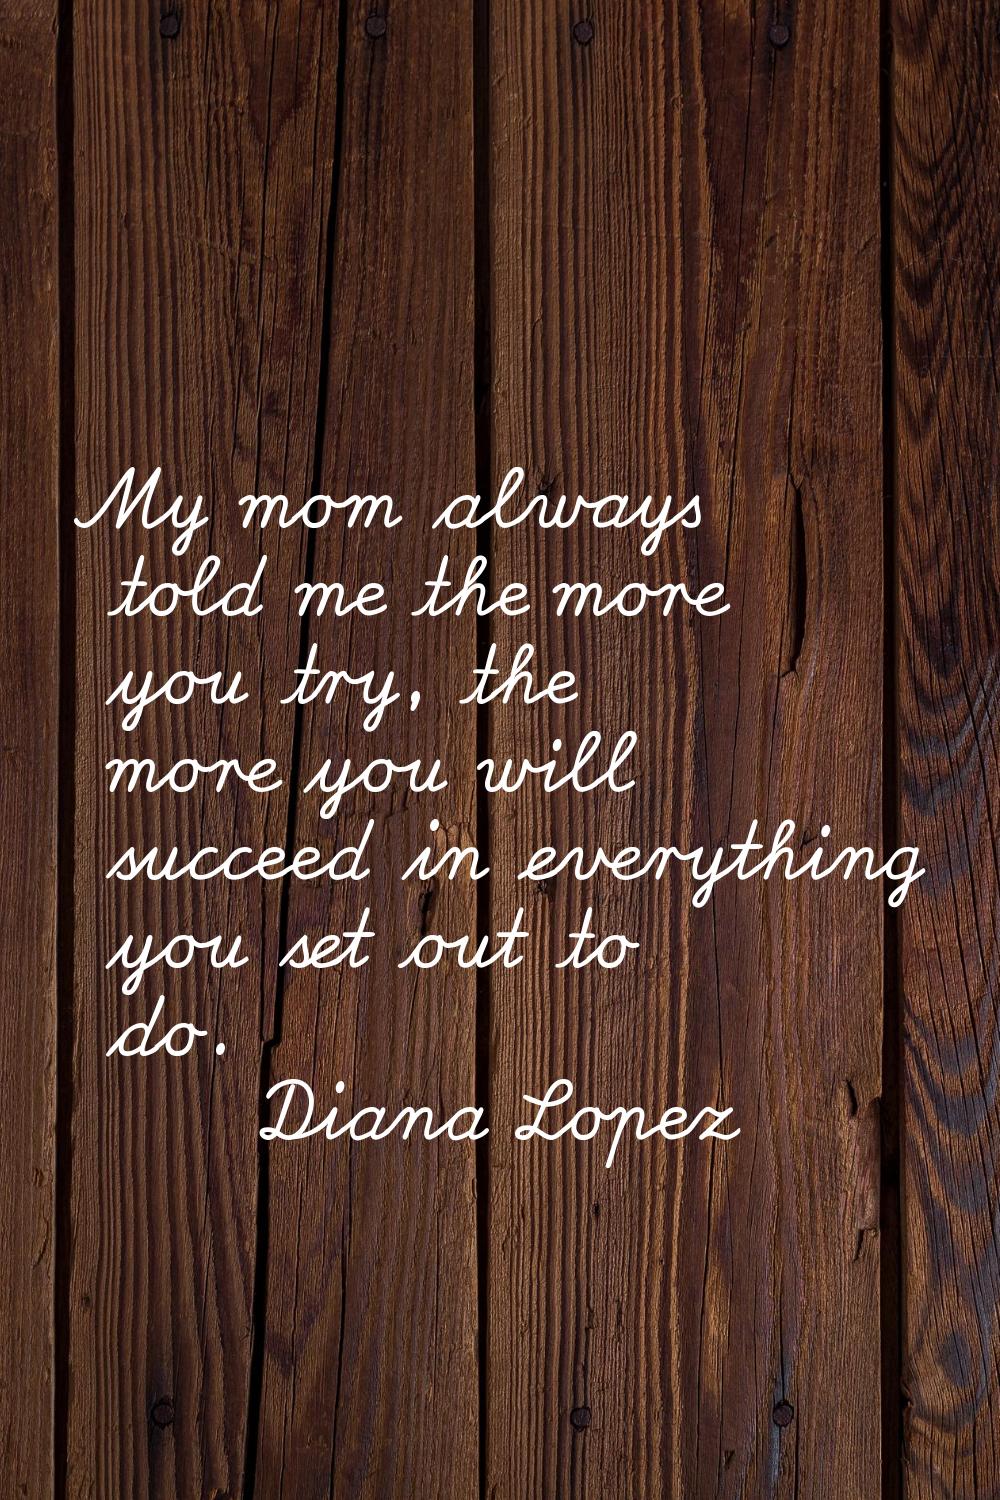 My mom always told me the more you try, the more you will succeed in everything you set out to do.